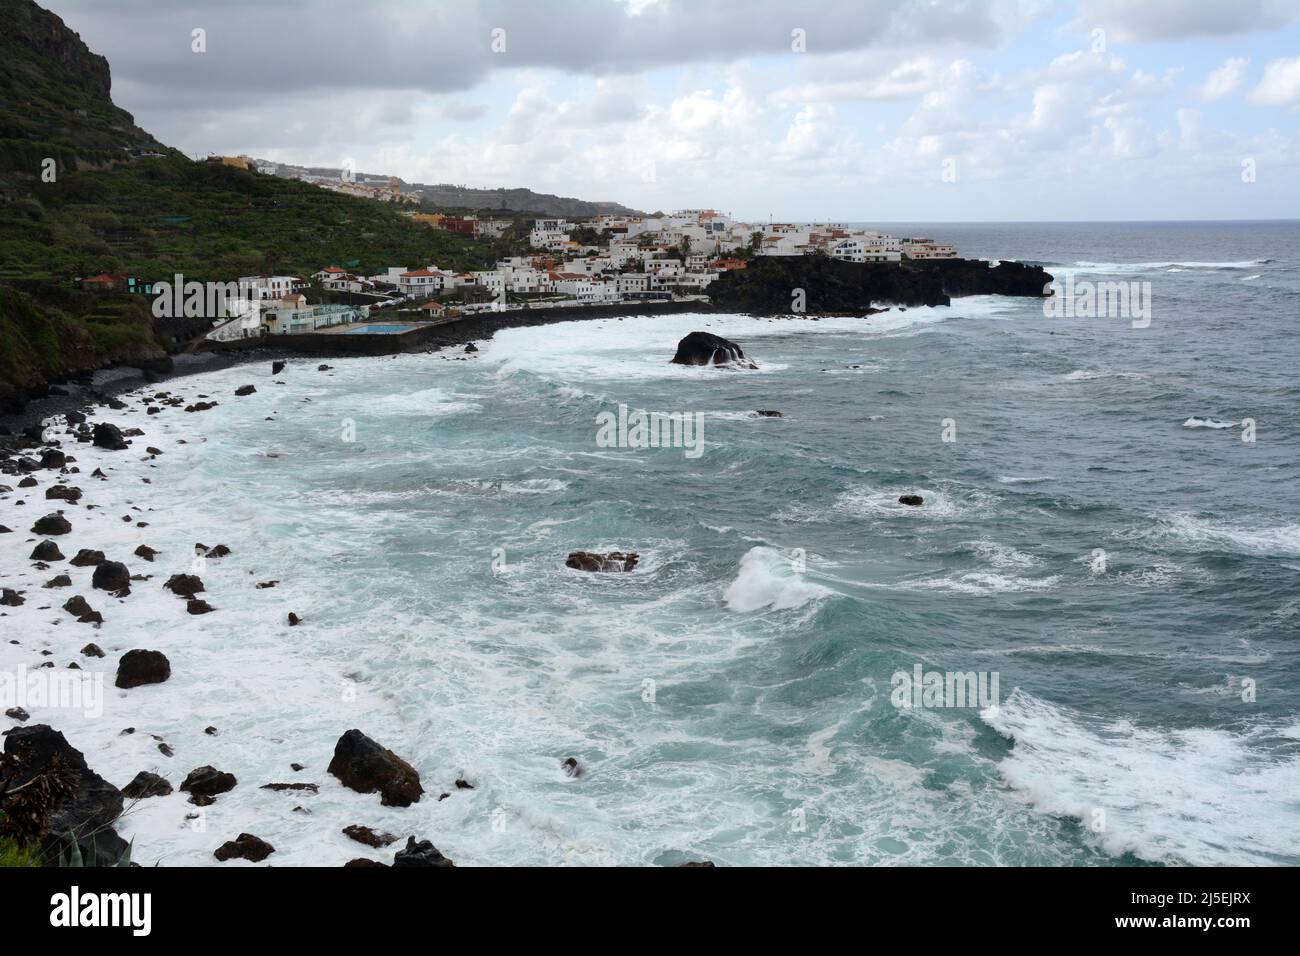 Whitewashed homes in the area of Las Aguas, in the town of San Juan de la Rambla, on the northern Atlantic coast of Tenerife, Canary Islands, Spain. Stock Photo